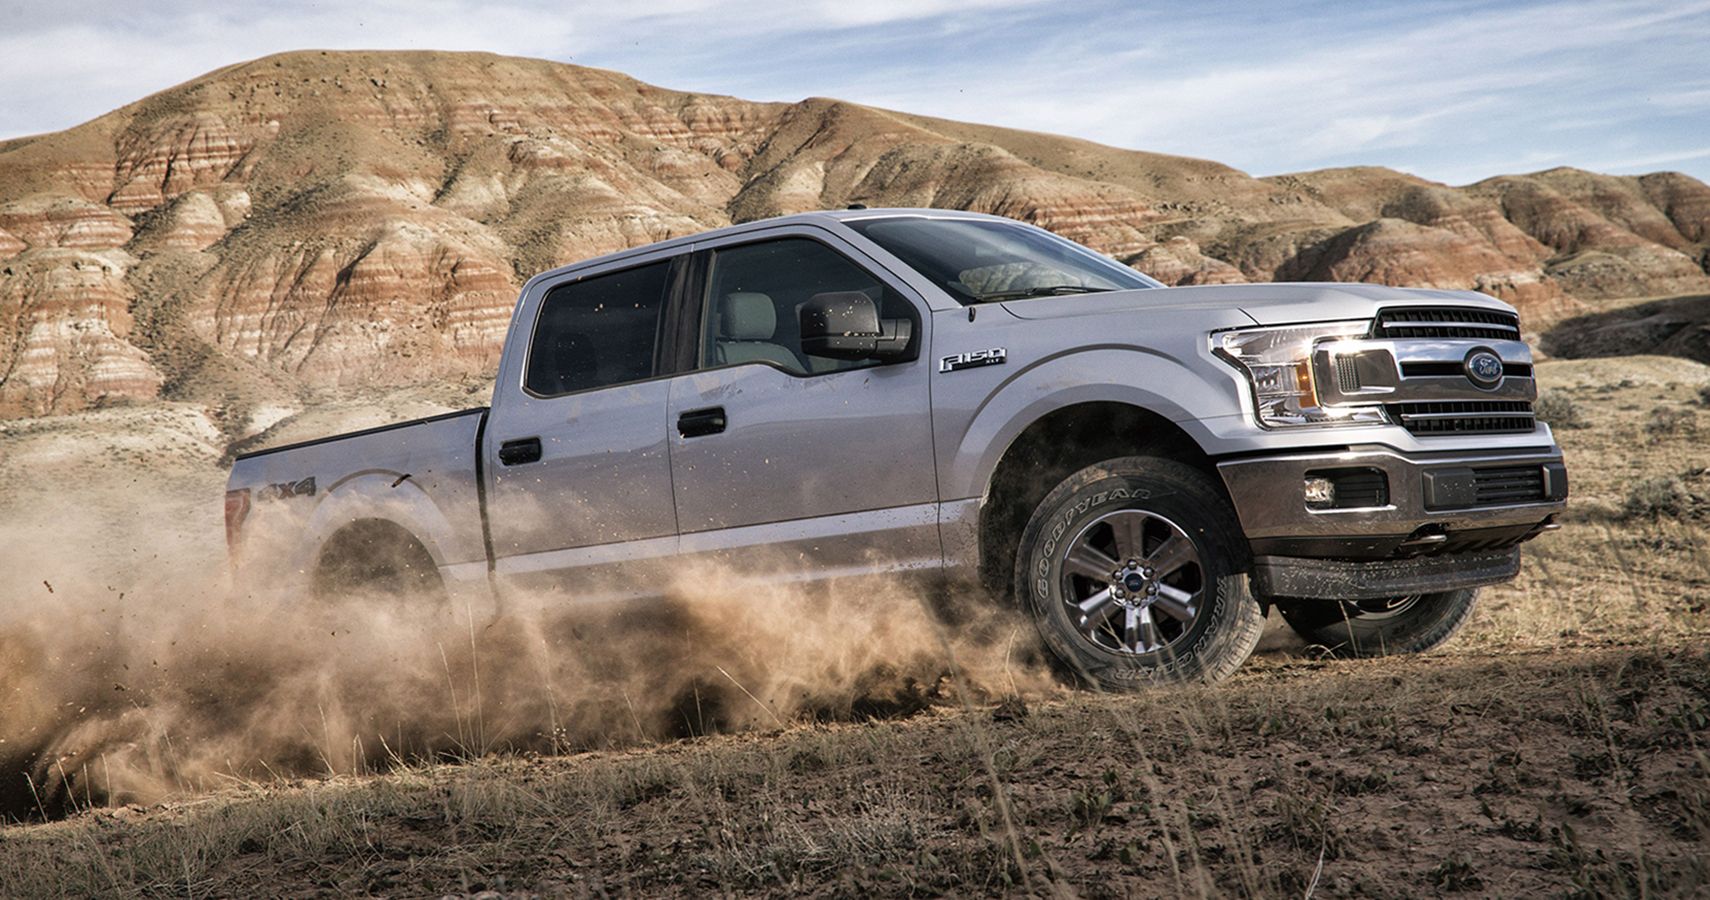 A Discounted, Supercharged Ford F-150: Cheap & Awesome